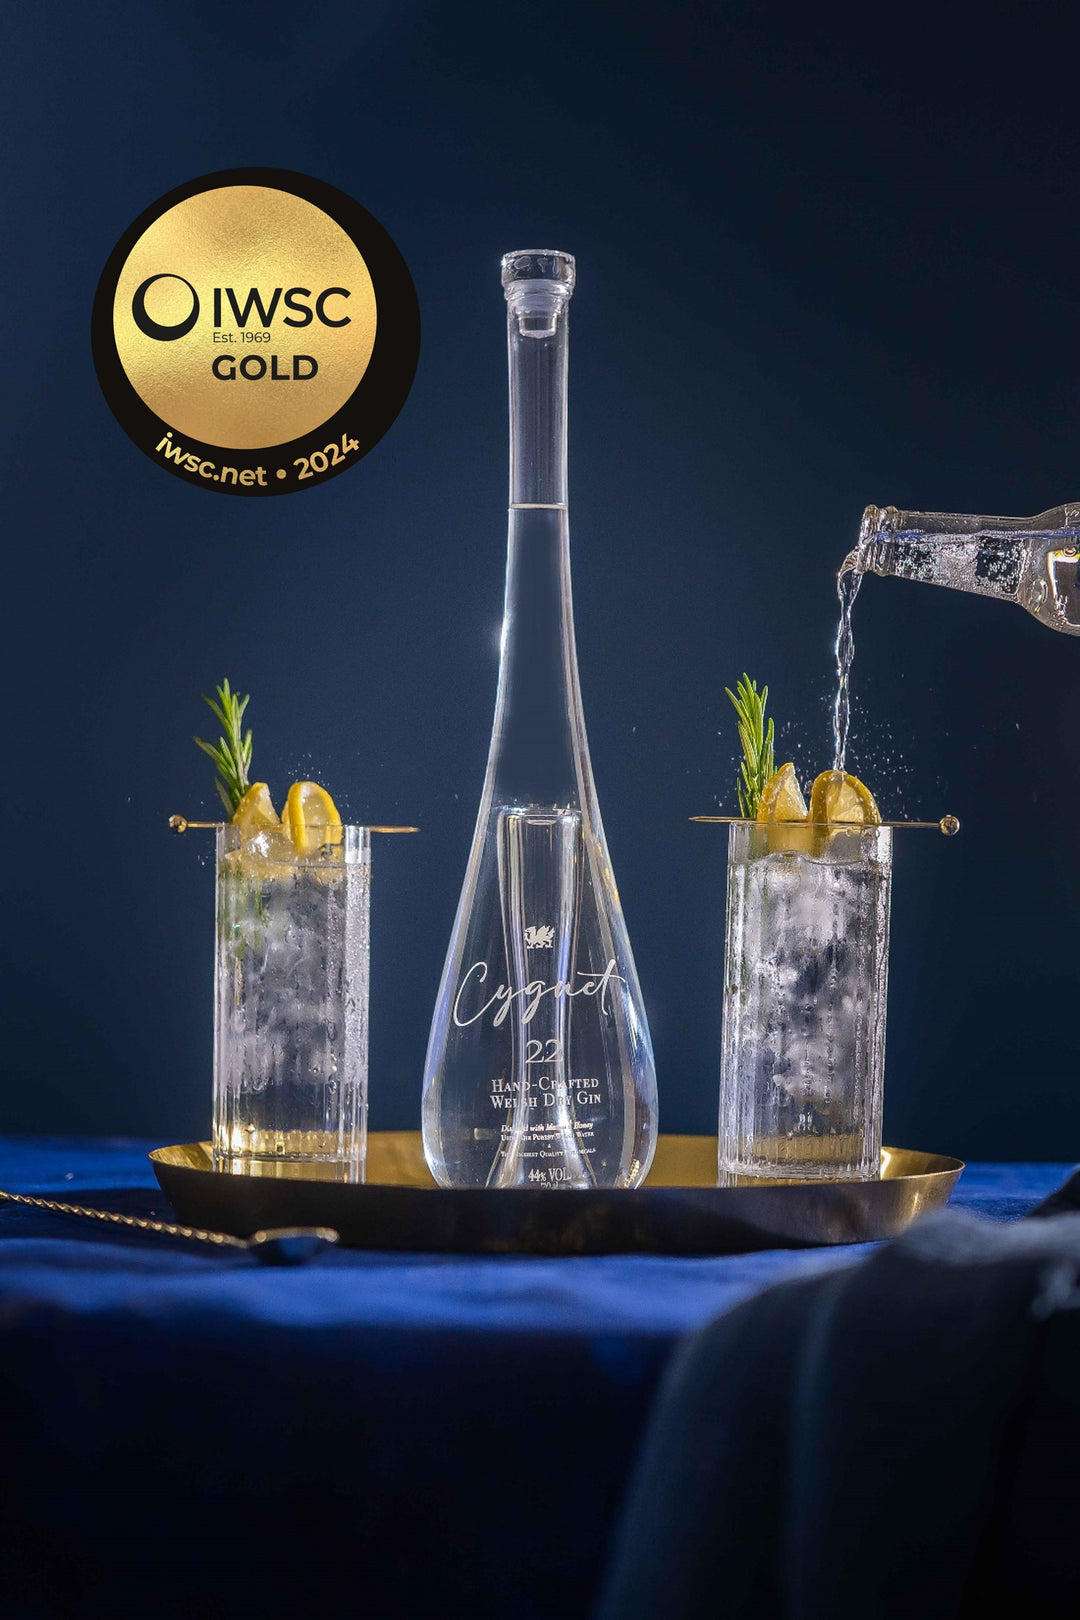 A Golden Moment: Cygnet 22 Wins Gold at IWSC for Ultra Premium Gin Category